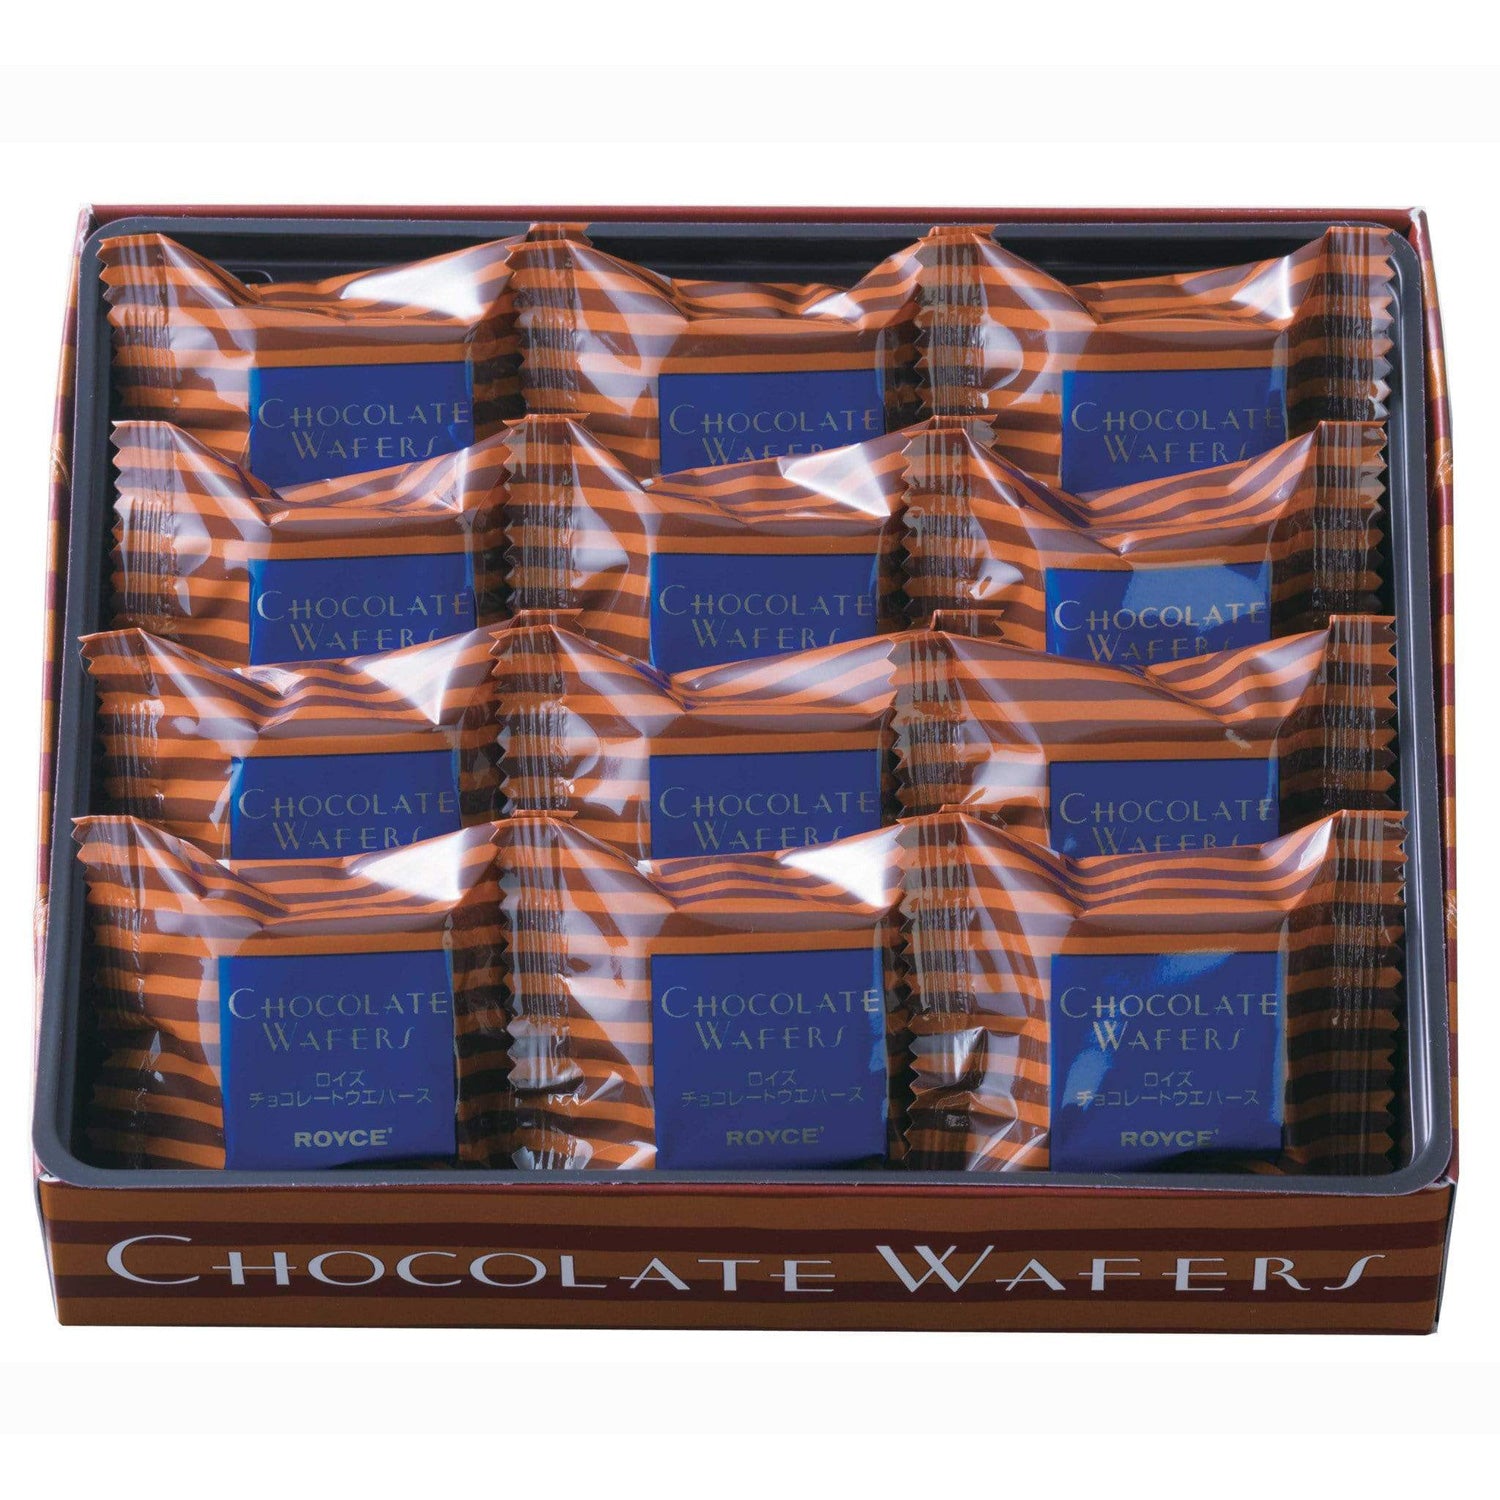 ROYCE' Chocolate - Chocolate Wafers "Hazel Cream" - Image shows a brown box filled with individually-wrapped wafers with brown striped packaging. Blue text on each says Chocolate Wafers ROYCE'. White text on the bottom part says Chocolate Wafers.